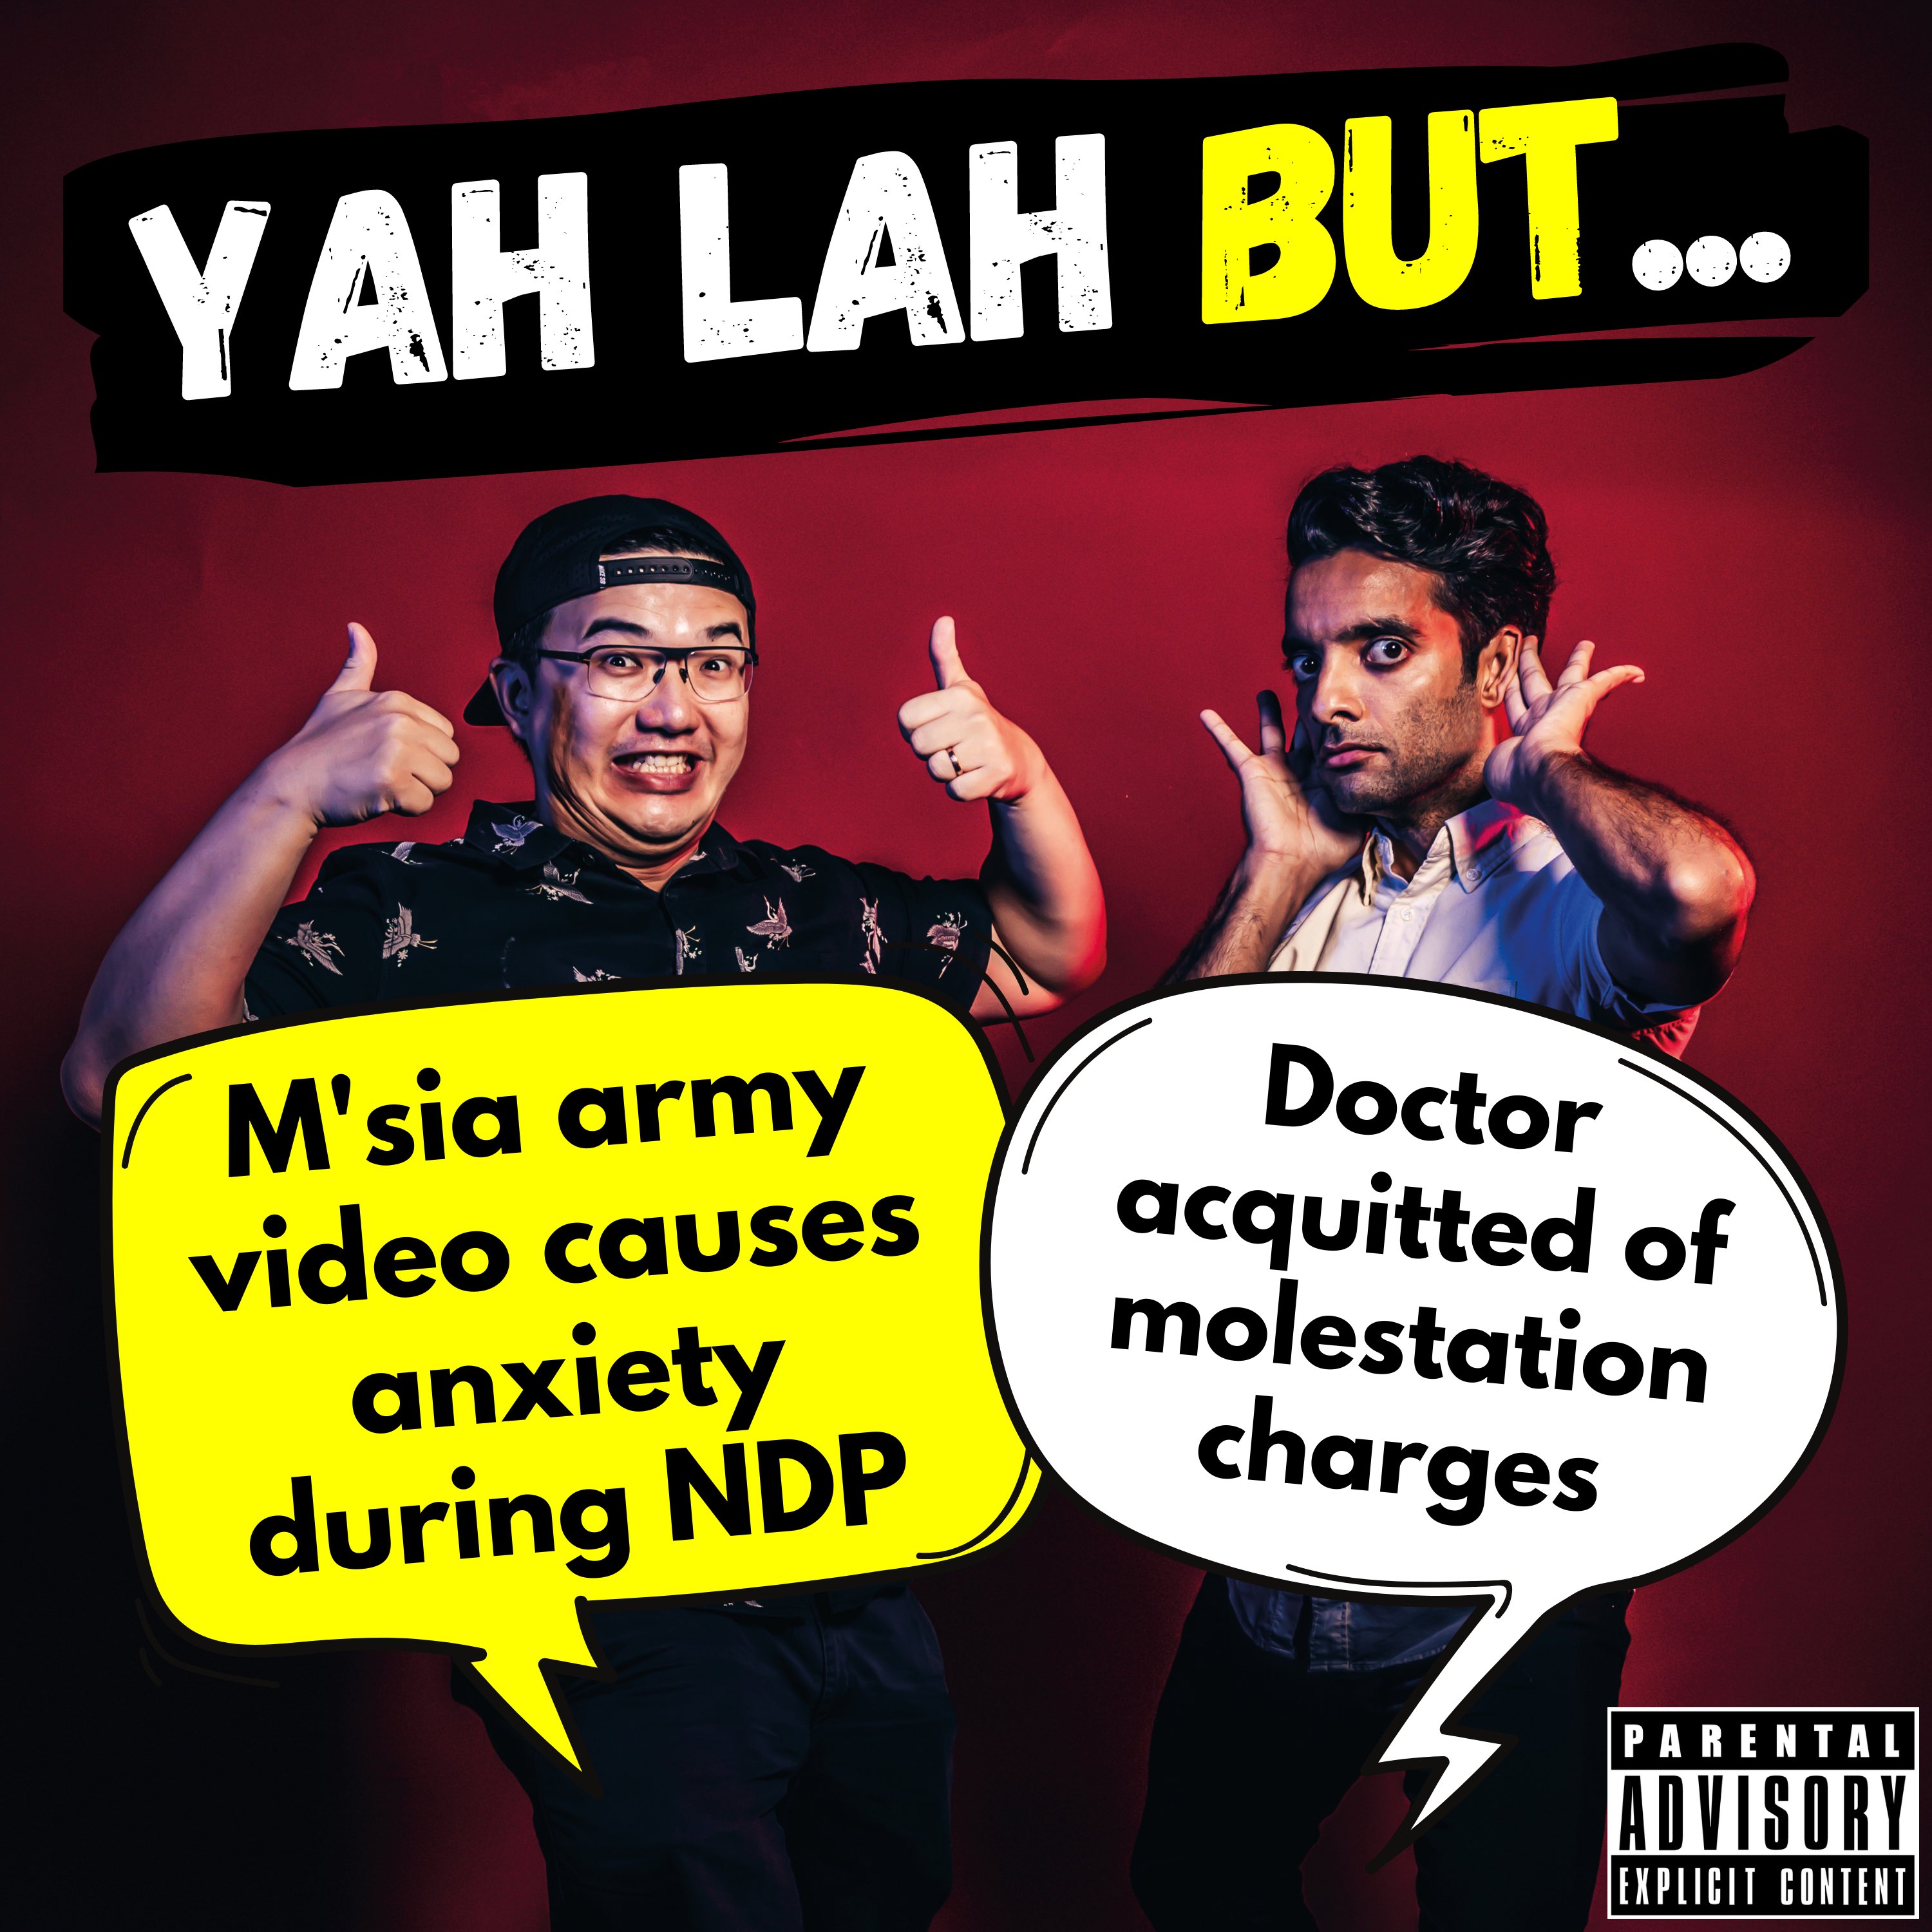 #198 - Malaysia army video causes anxiety during NDP & doctor acquitted of molestation charges after 4 years